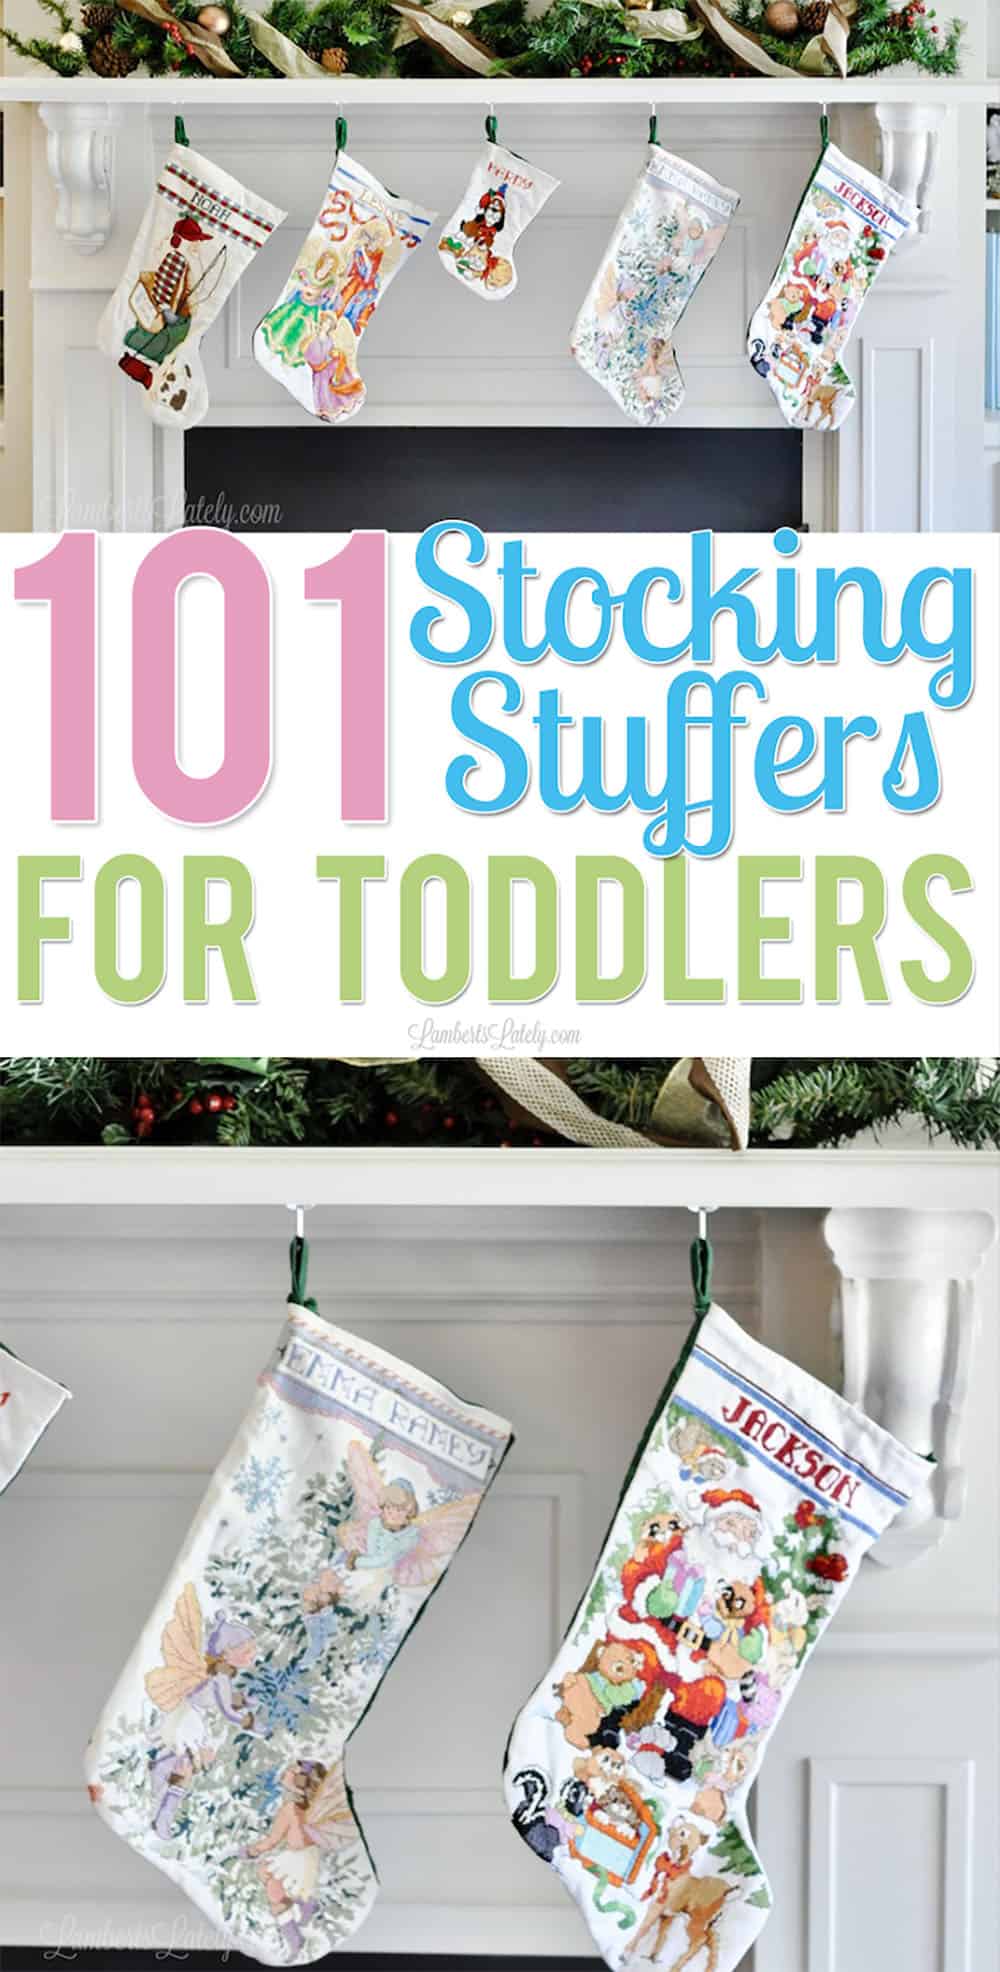  This is a great collection of some of the best stocking stuffers for toddlers or preschoolers - lots of cheap, creative ideas! Great for 1-5 years old and has ideas for both boys and girls.